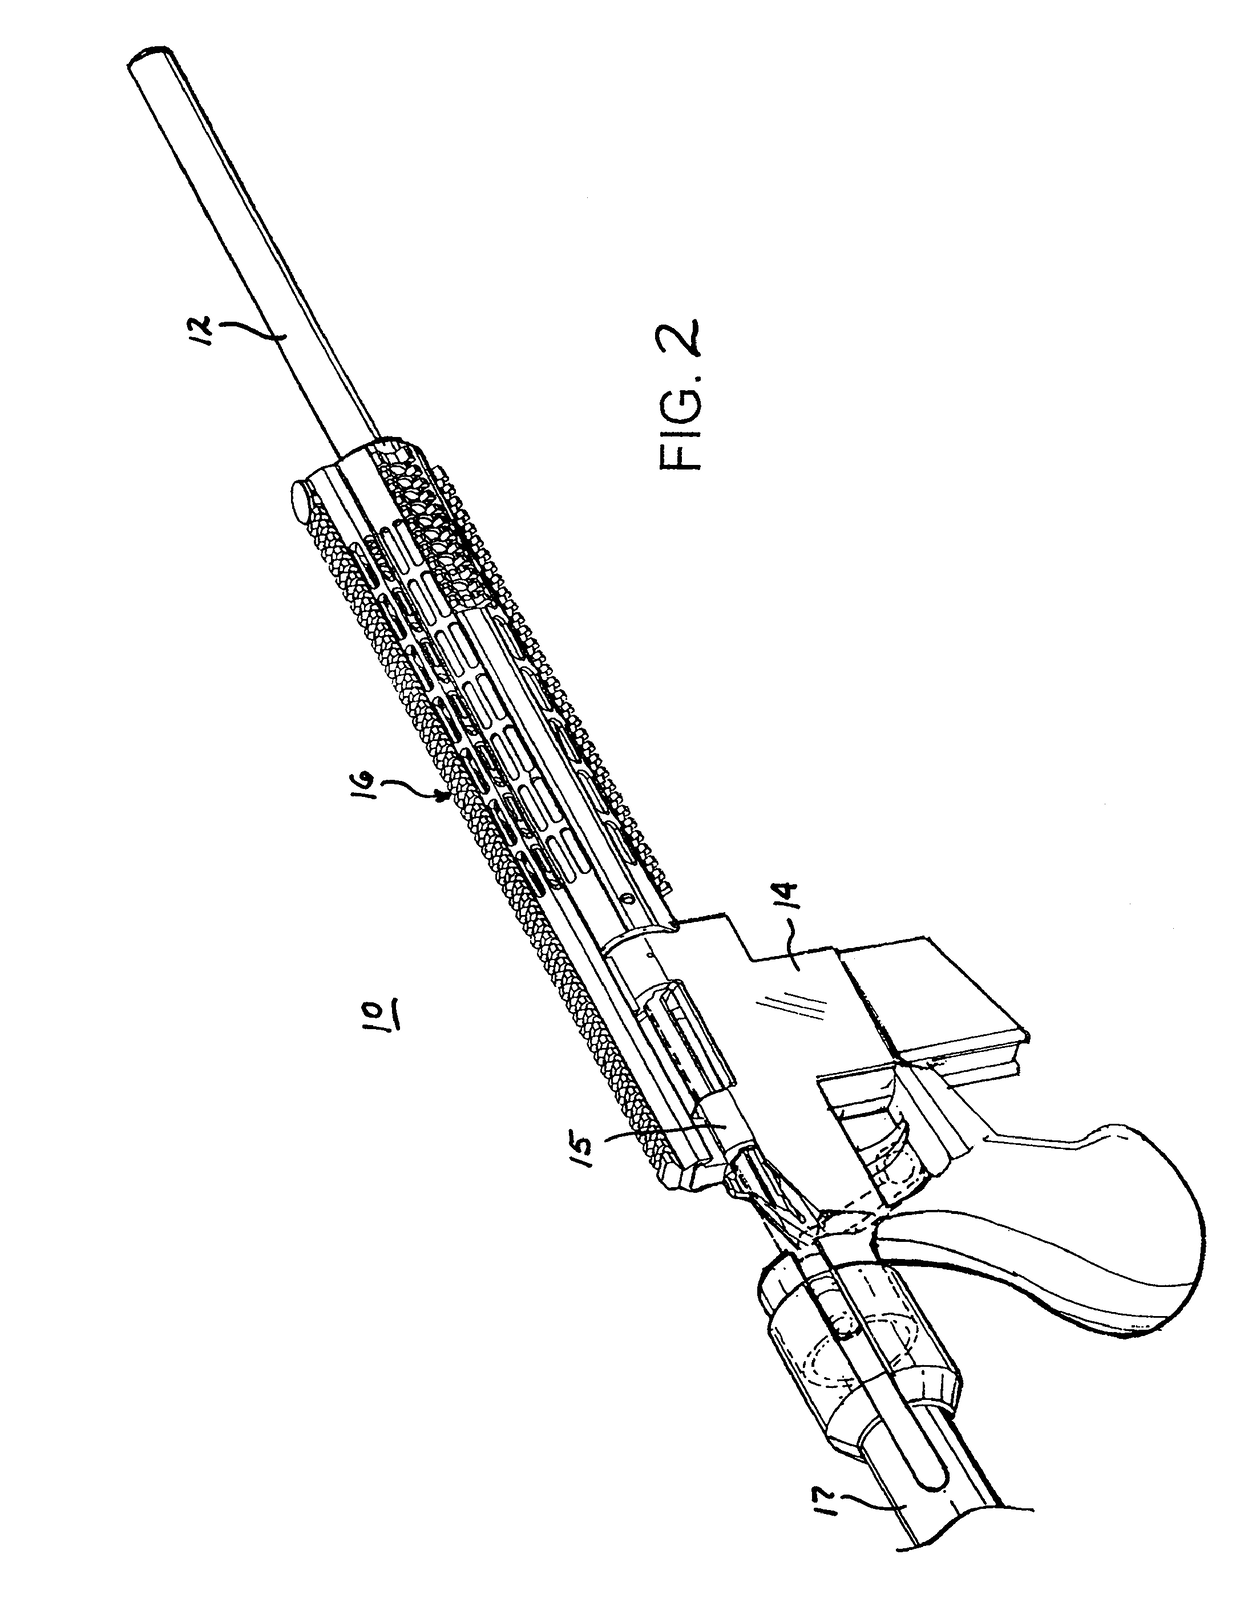 Stabilized rifle barrel and rifle